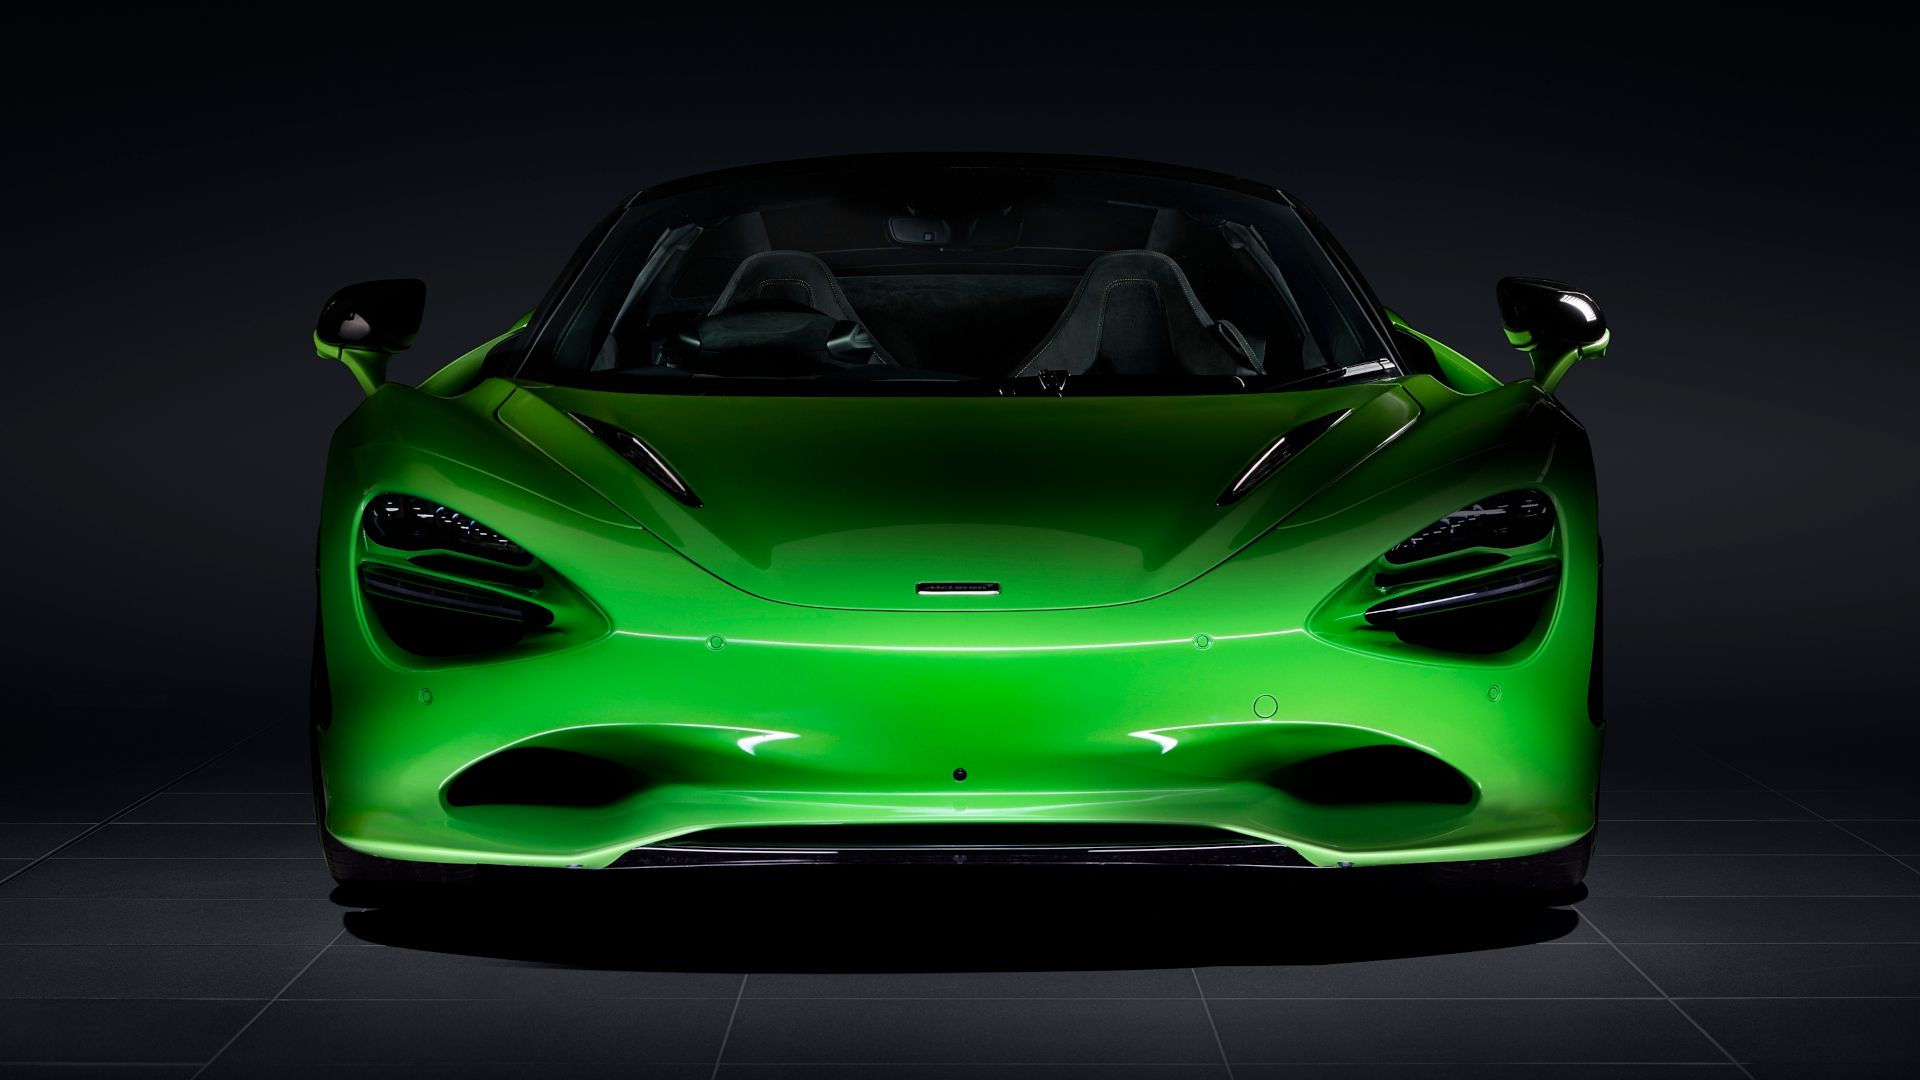 The front end of a green McLaren 750S